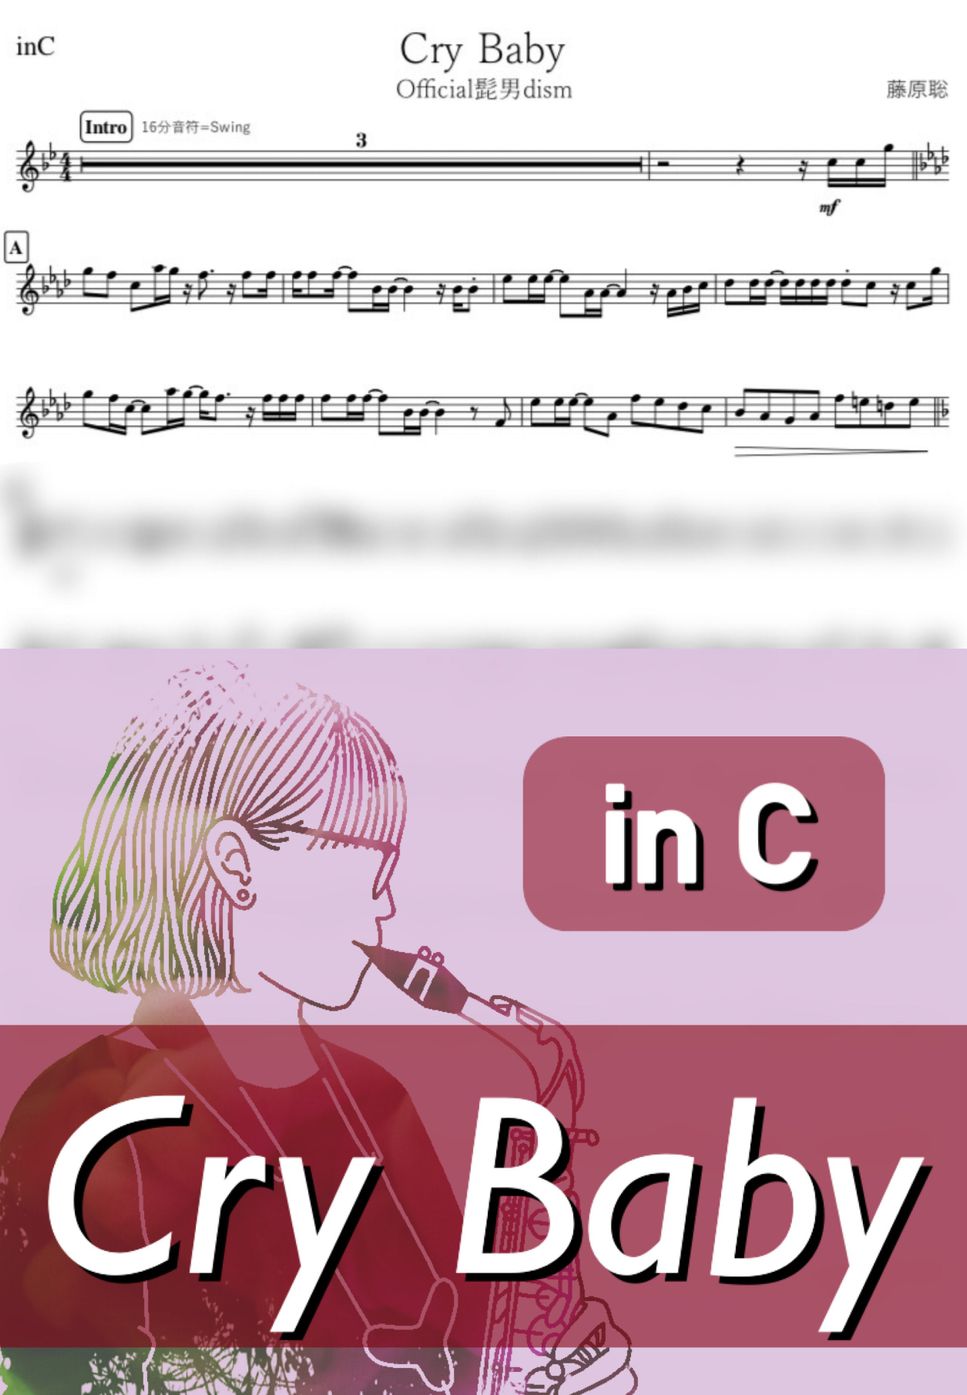 Official髭男dism - Cry Baby (C) by kanamusic